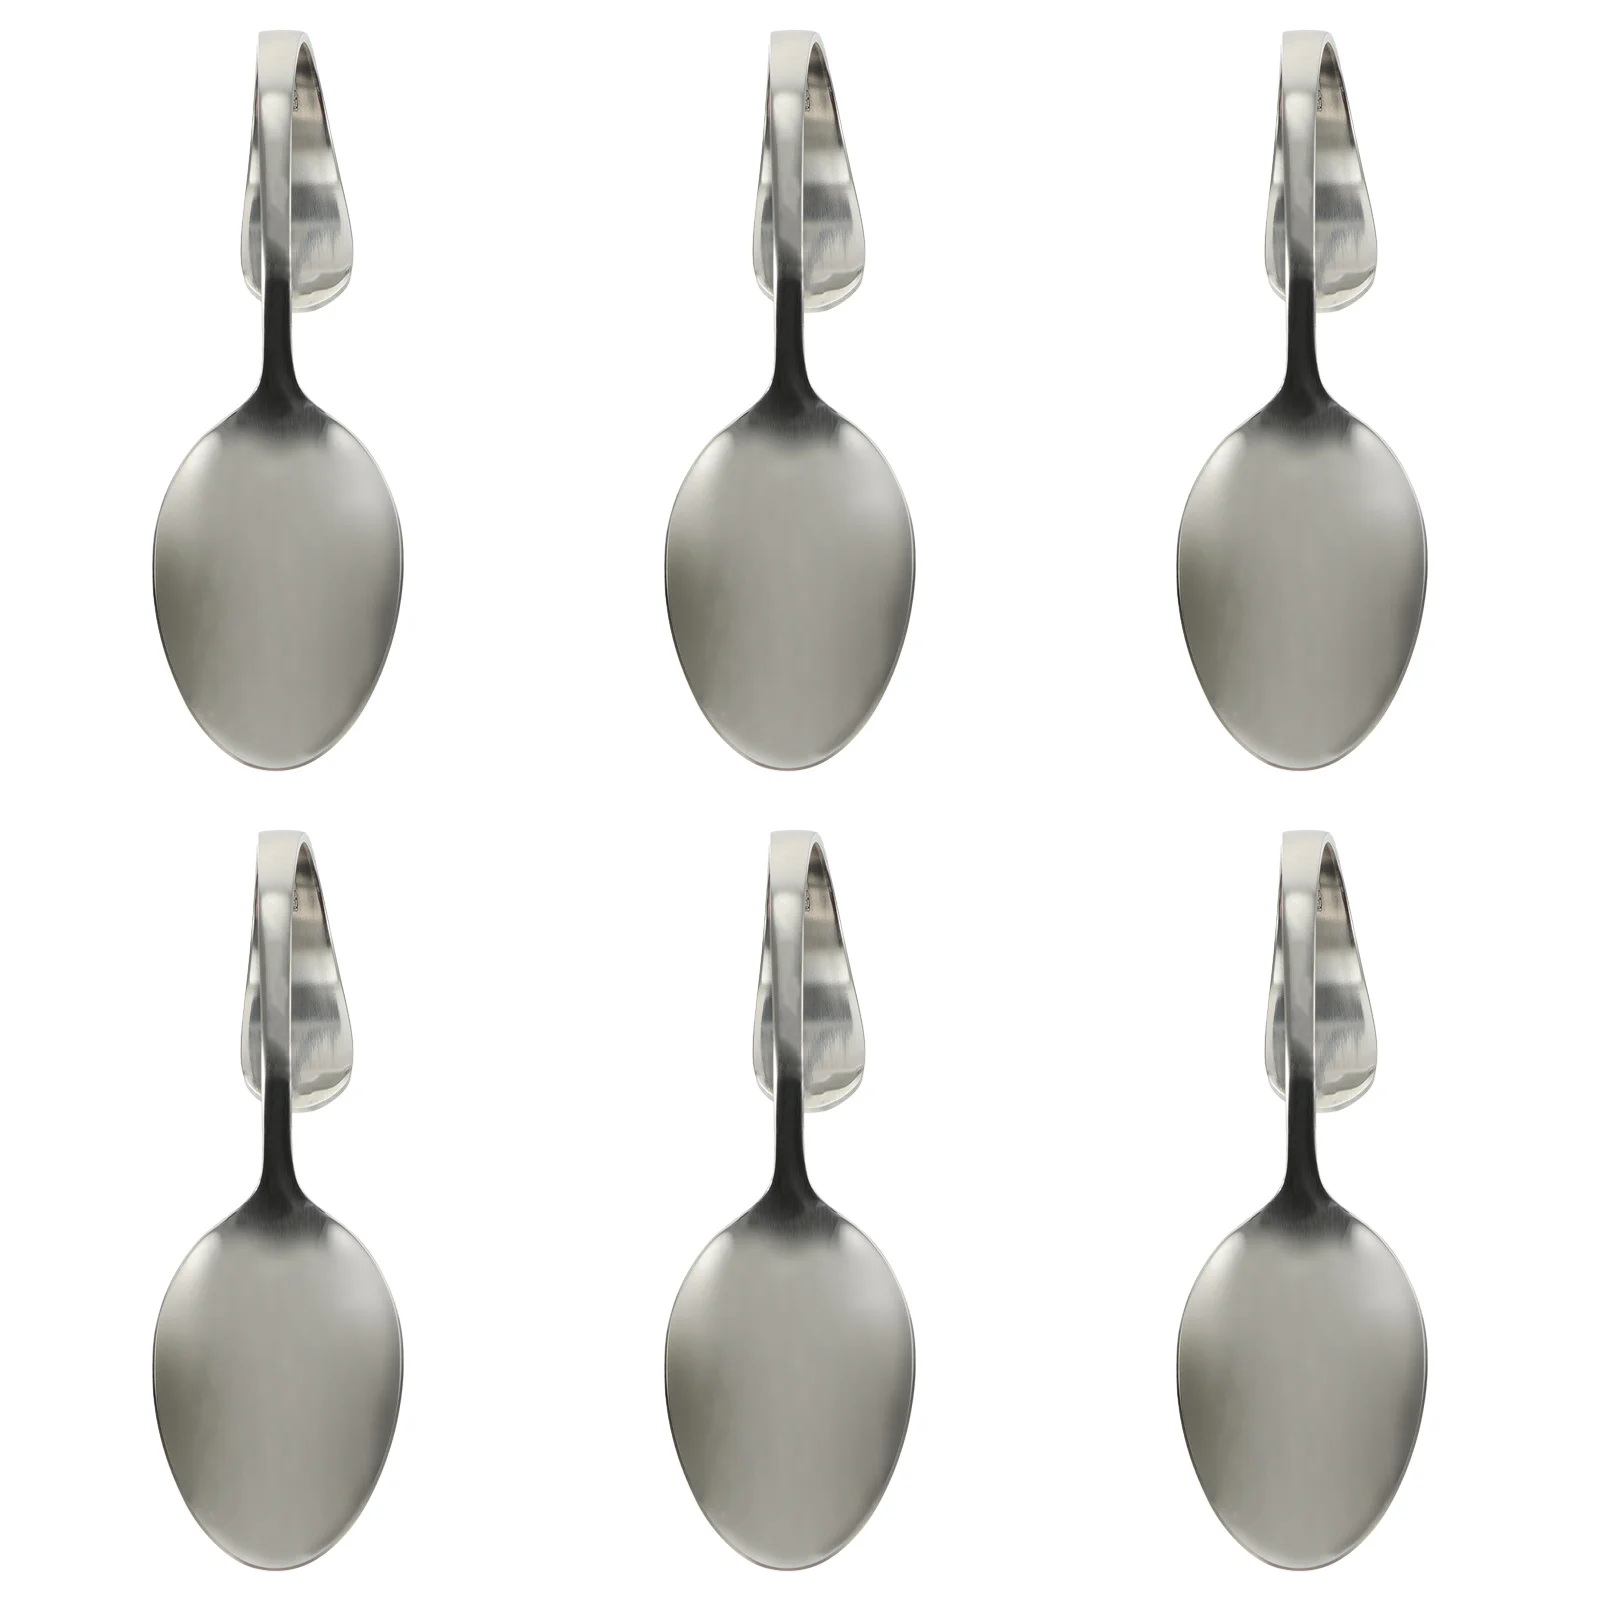 

6 Pcs Coffee Stirring Spoon Sugar Buffet Serving Spoons Gravy Soup Baby Sets Sauce Ladle Dessert Curved Handle